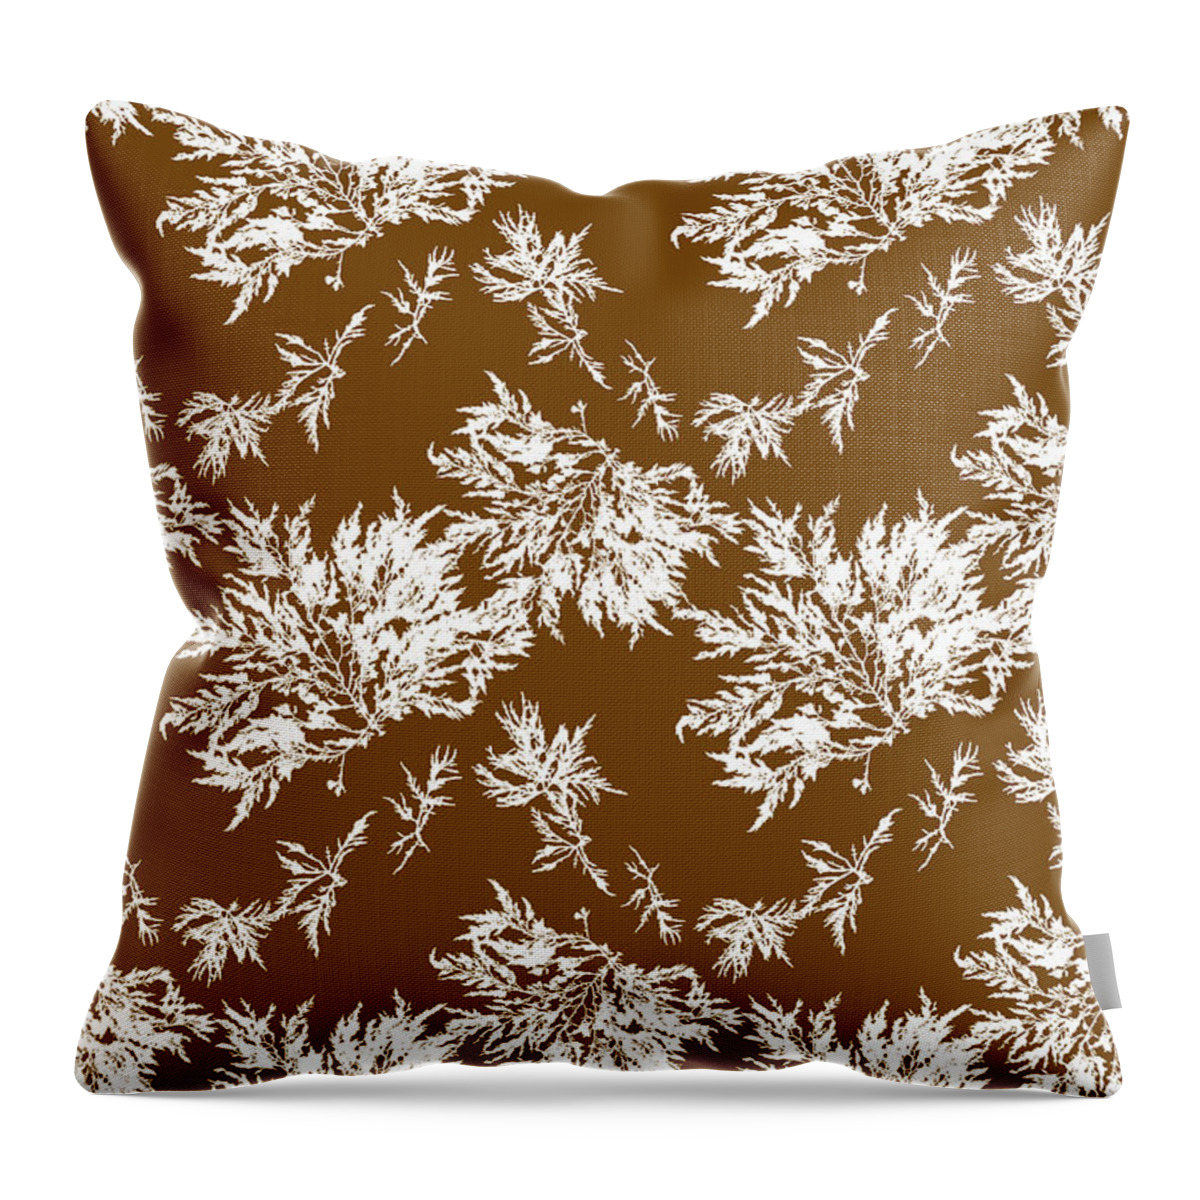 Seaweed Throw Pillow featuring the mixed media Brown Kelp Seaweed Art Chylocladia Clavellosa by Christina Rollo